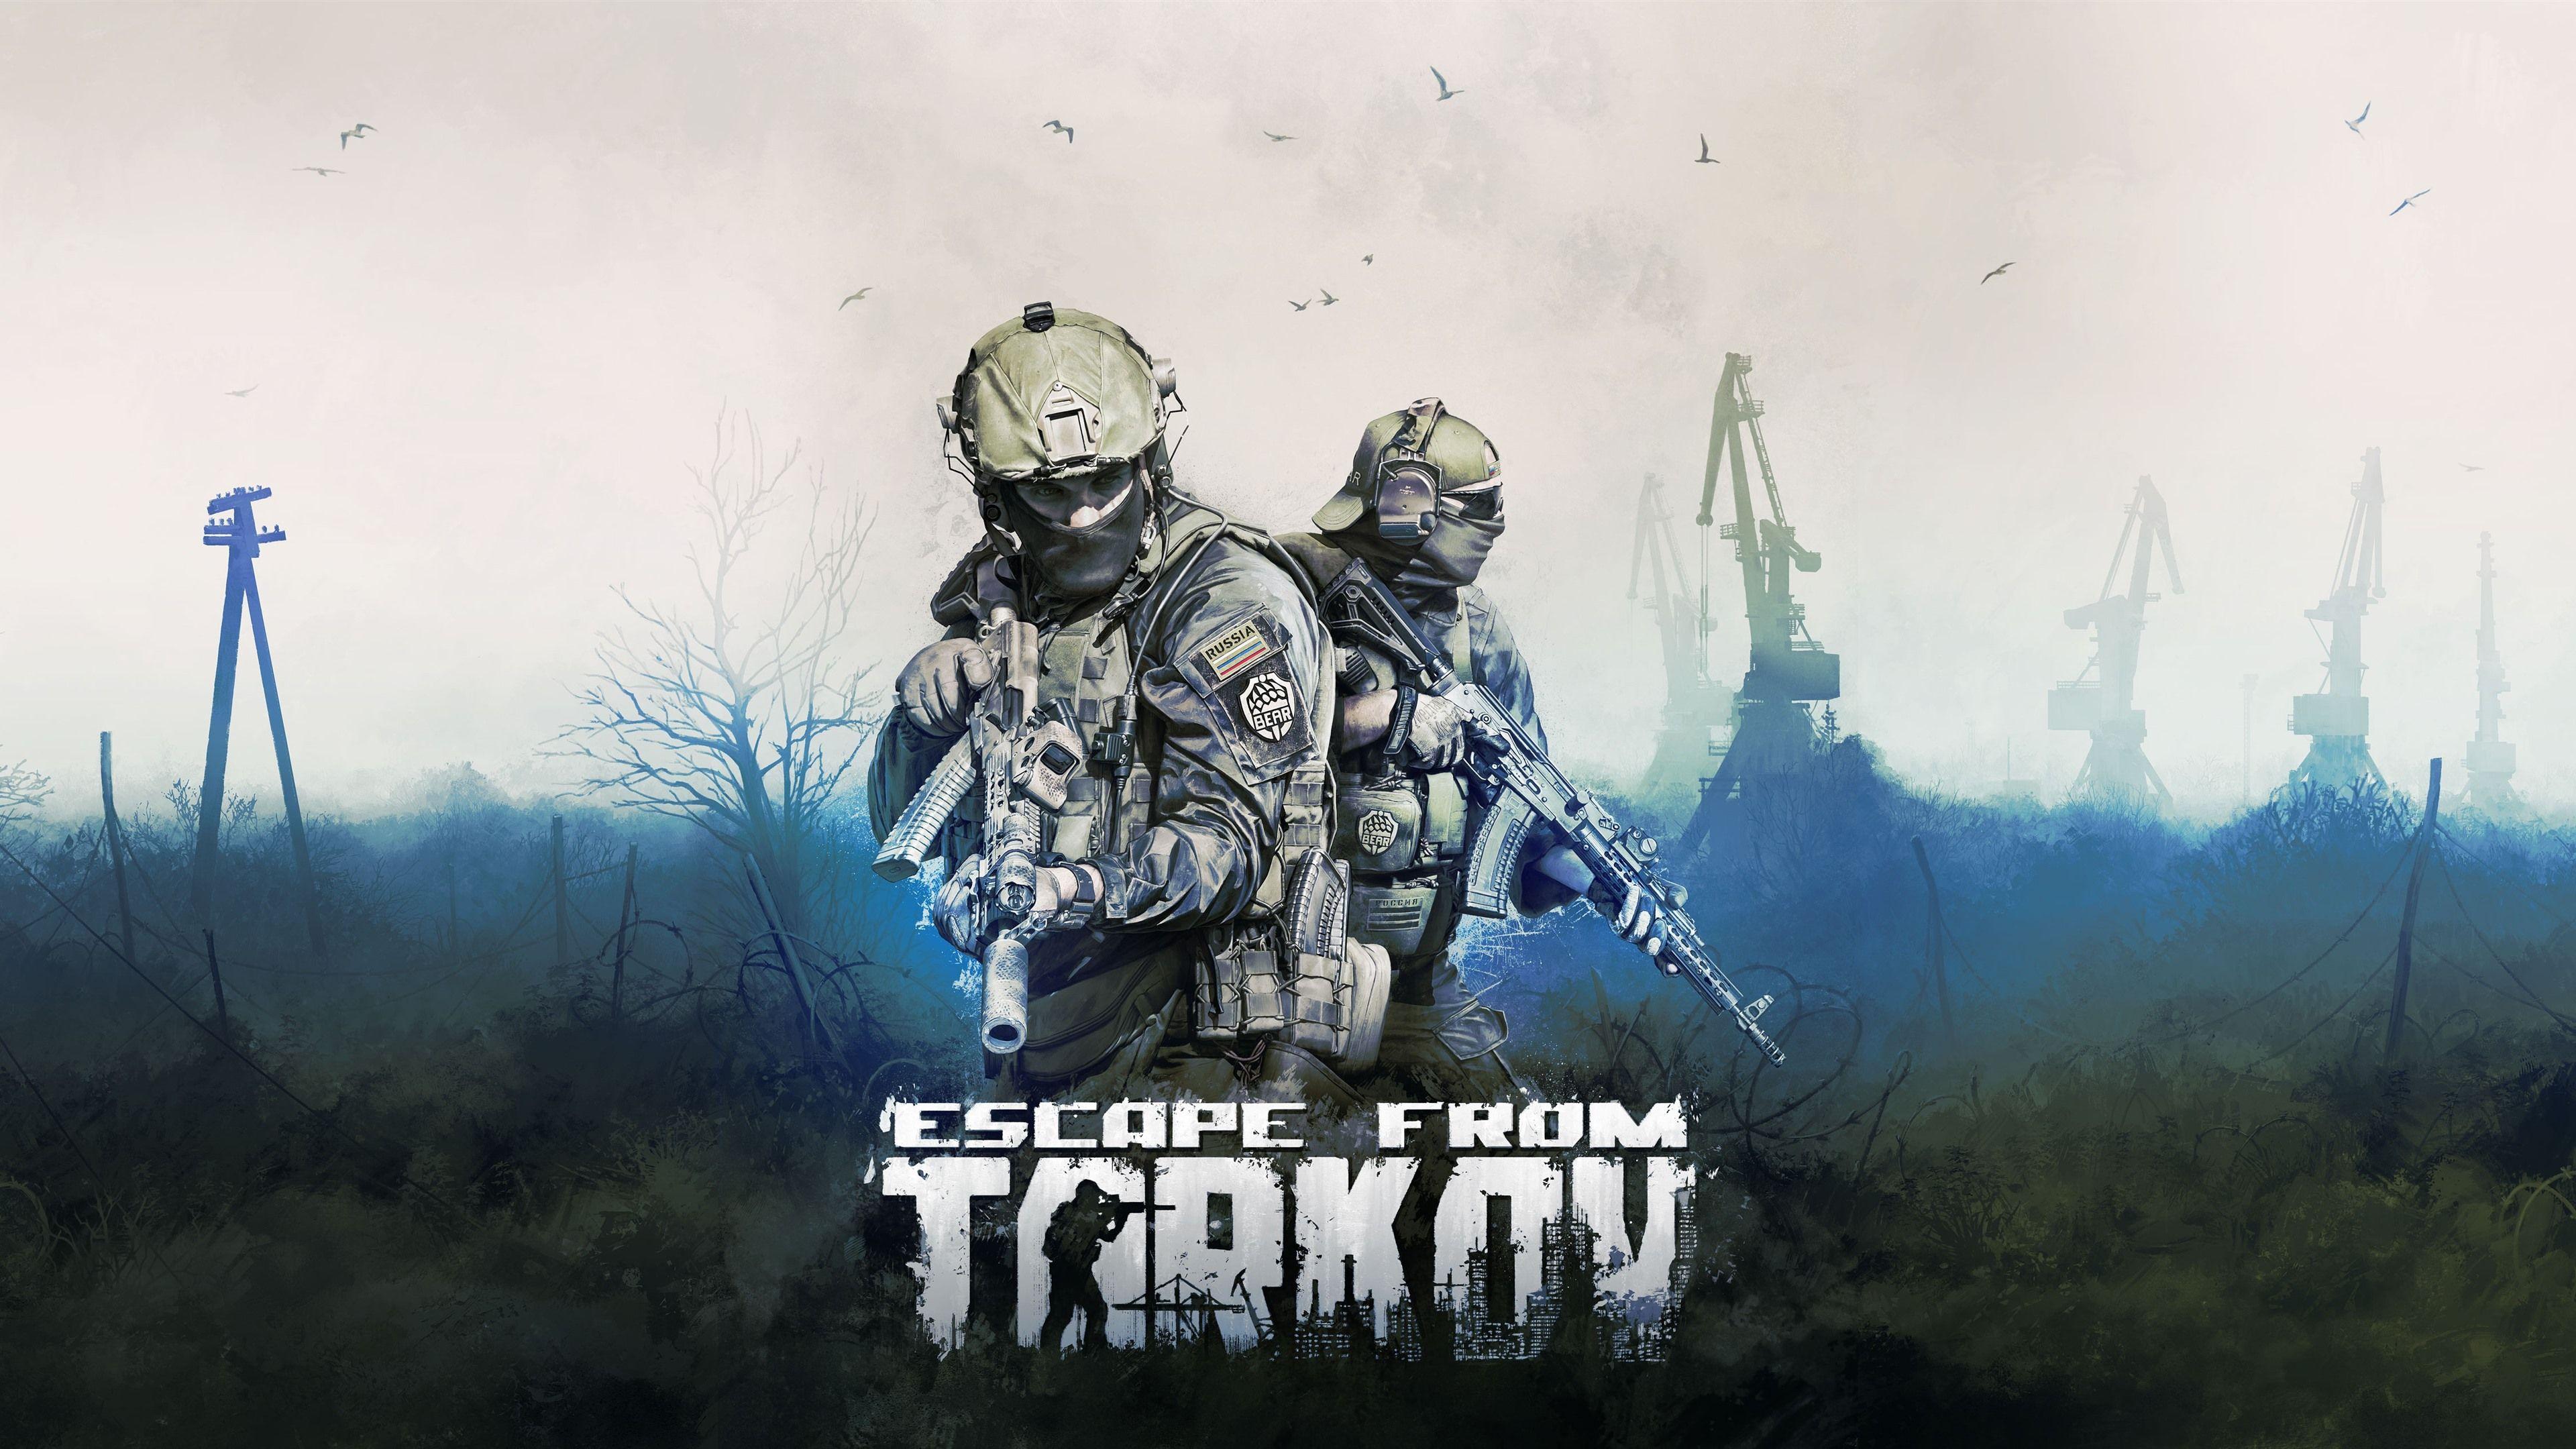 Escape From Tarkov Wallpapers - Top Free Escape From Tarkov Backgrounds